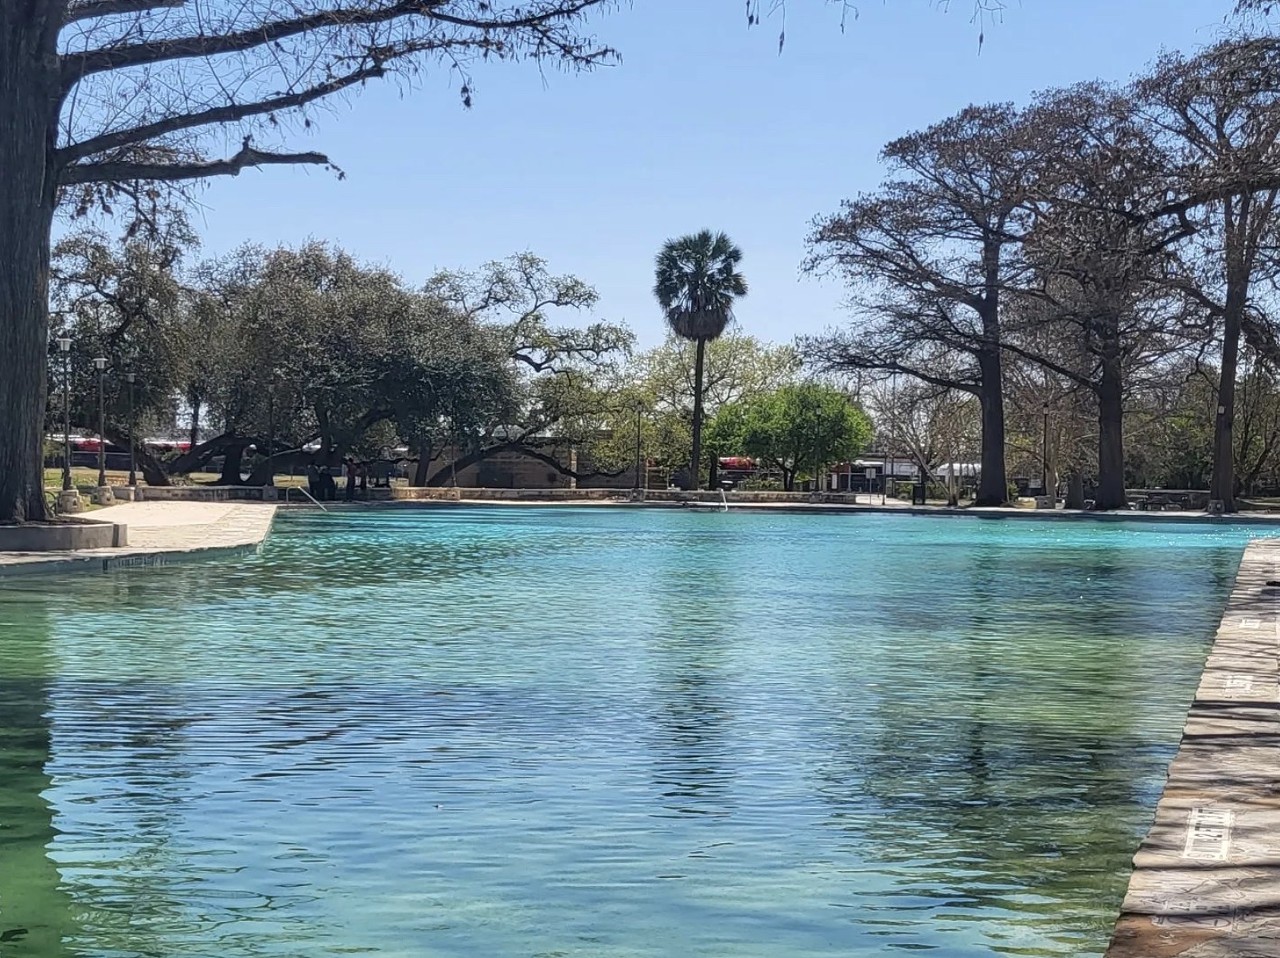 Take a swim at San Pedro Springs Park Pool
2200 N. Flores St., (210) 732-5992, sanantonio.gov 
Looking to spend a day in the poolside shade at a history-filled park smack-dab in the middle of San Antonio? Look no further than San Pedro Springs Park Pool. The spring-fed pool was built as a part of the historic park’s overall renovation in 1915-20, replacing what was once a lake bed. There’s no fee for San Antonians looking to jump in this cold and refreshing water hole this summer.